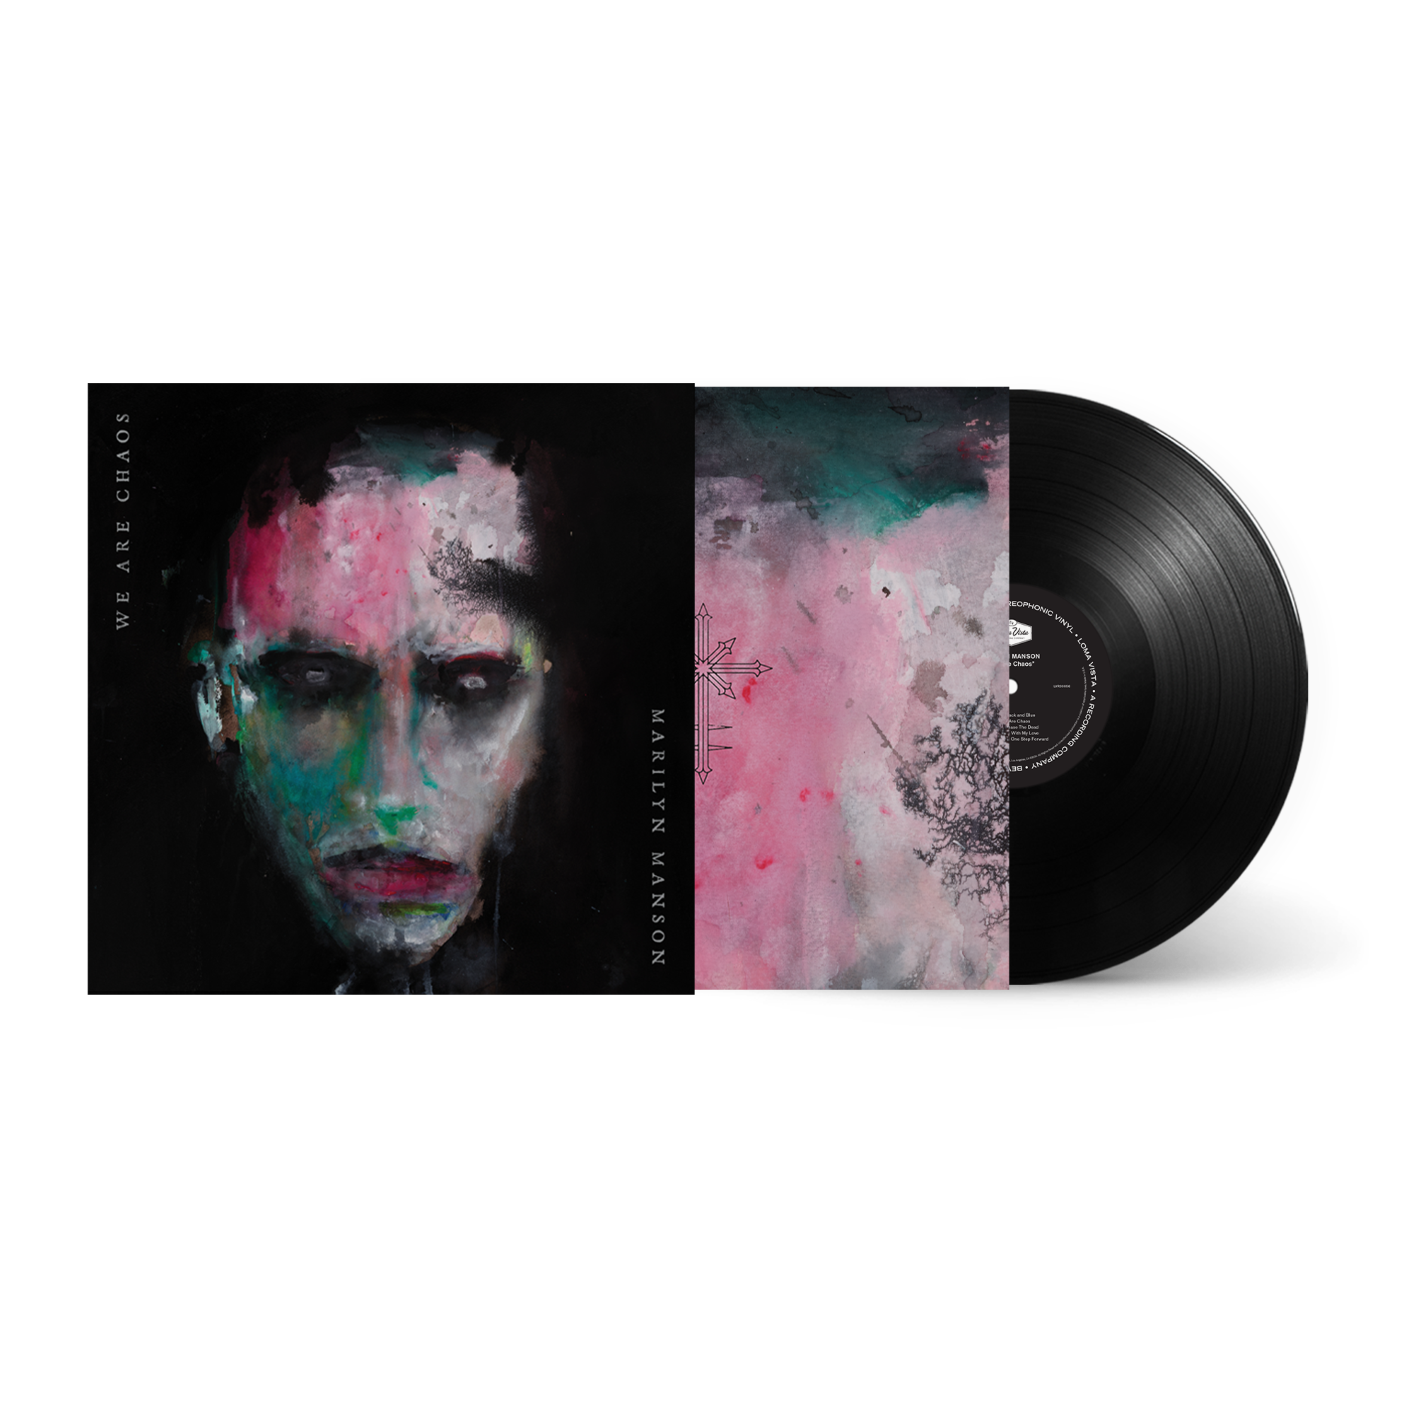 Marilyn Manson ‎– We Are Chaos - New LP Record 2020 Loma Vista USA Indie Exclusive Vinyl, Poster & Postcards - Alternative Rock / Industrial